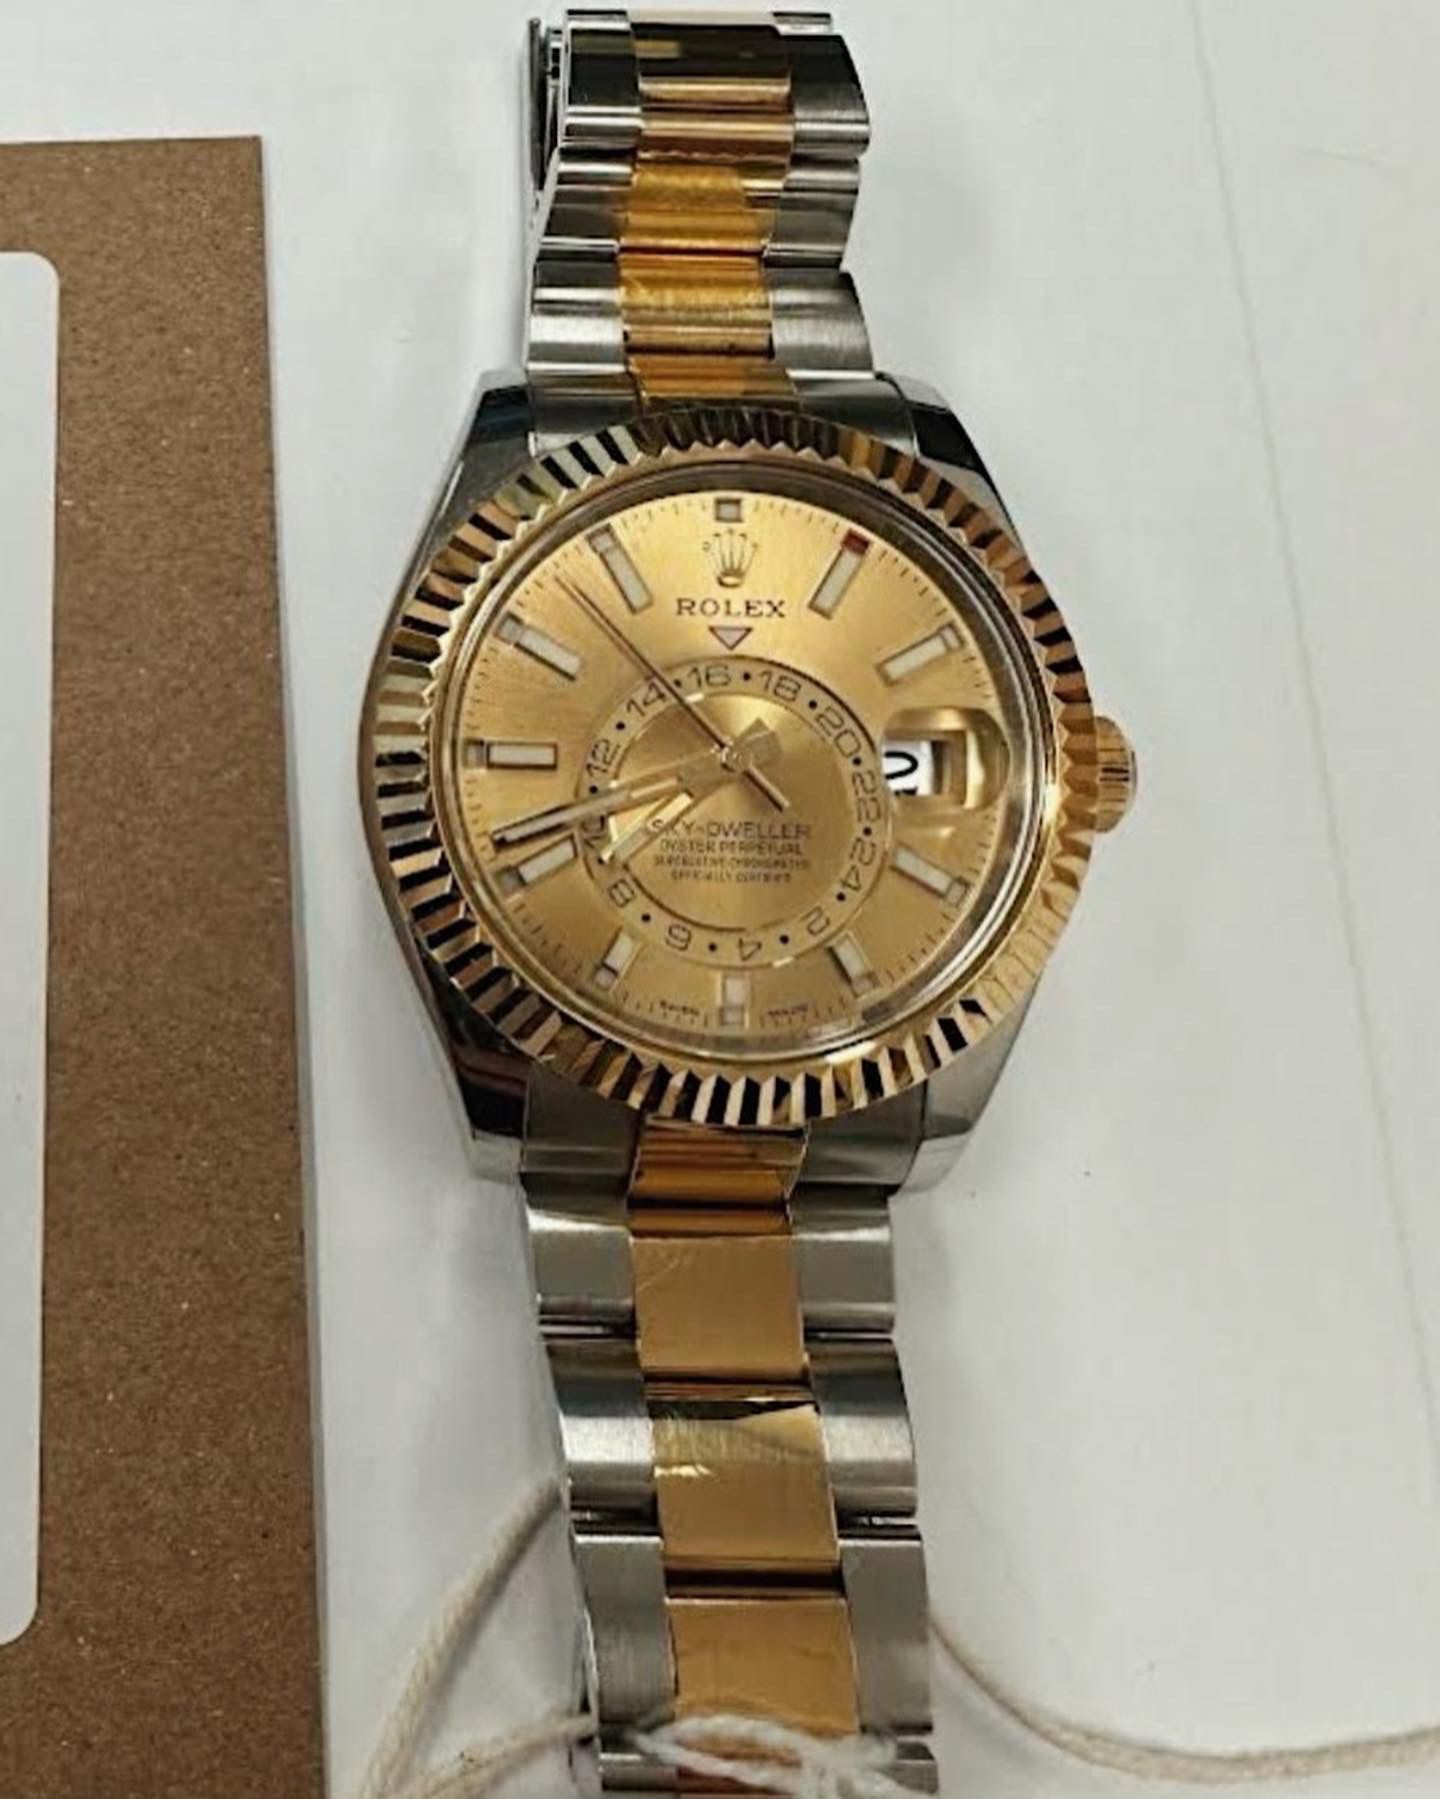 One of the watches seized from Christopher Waldron's home.